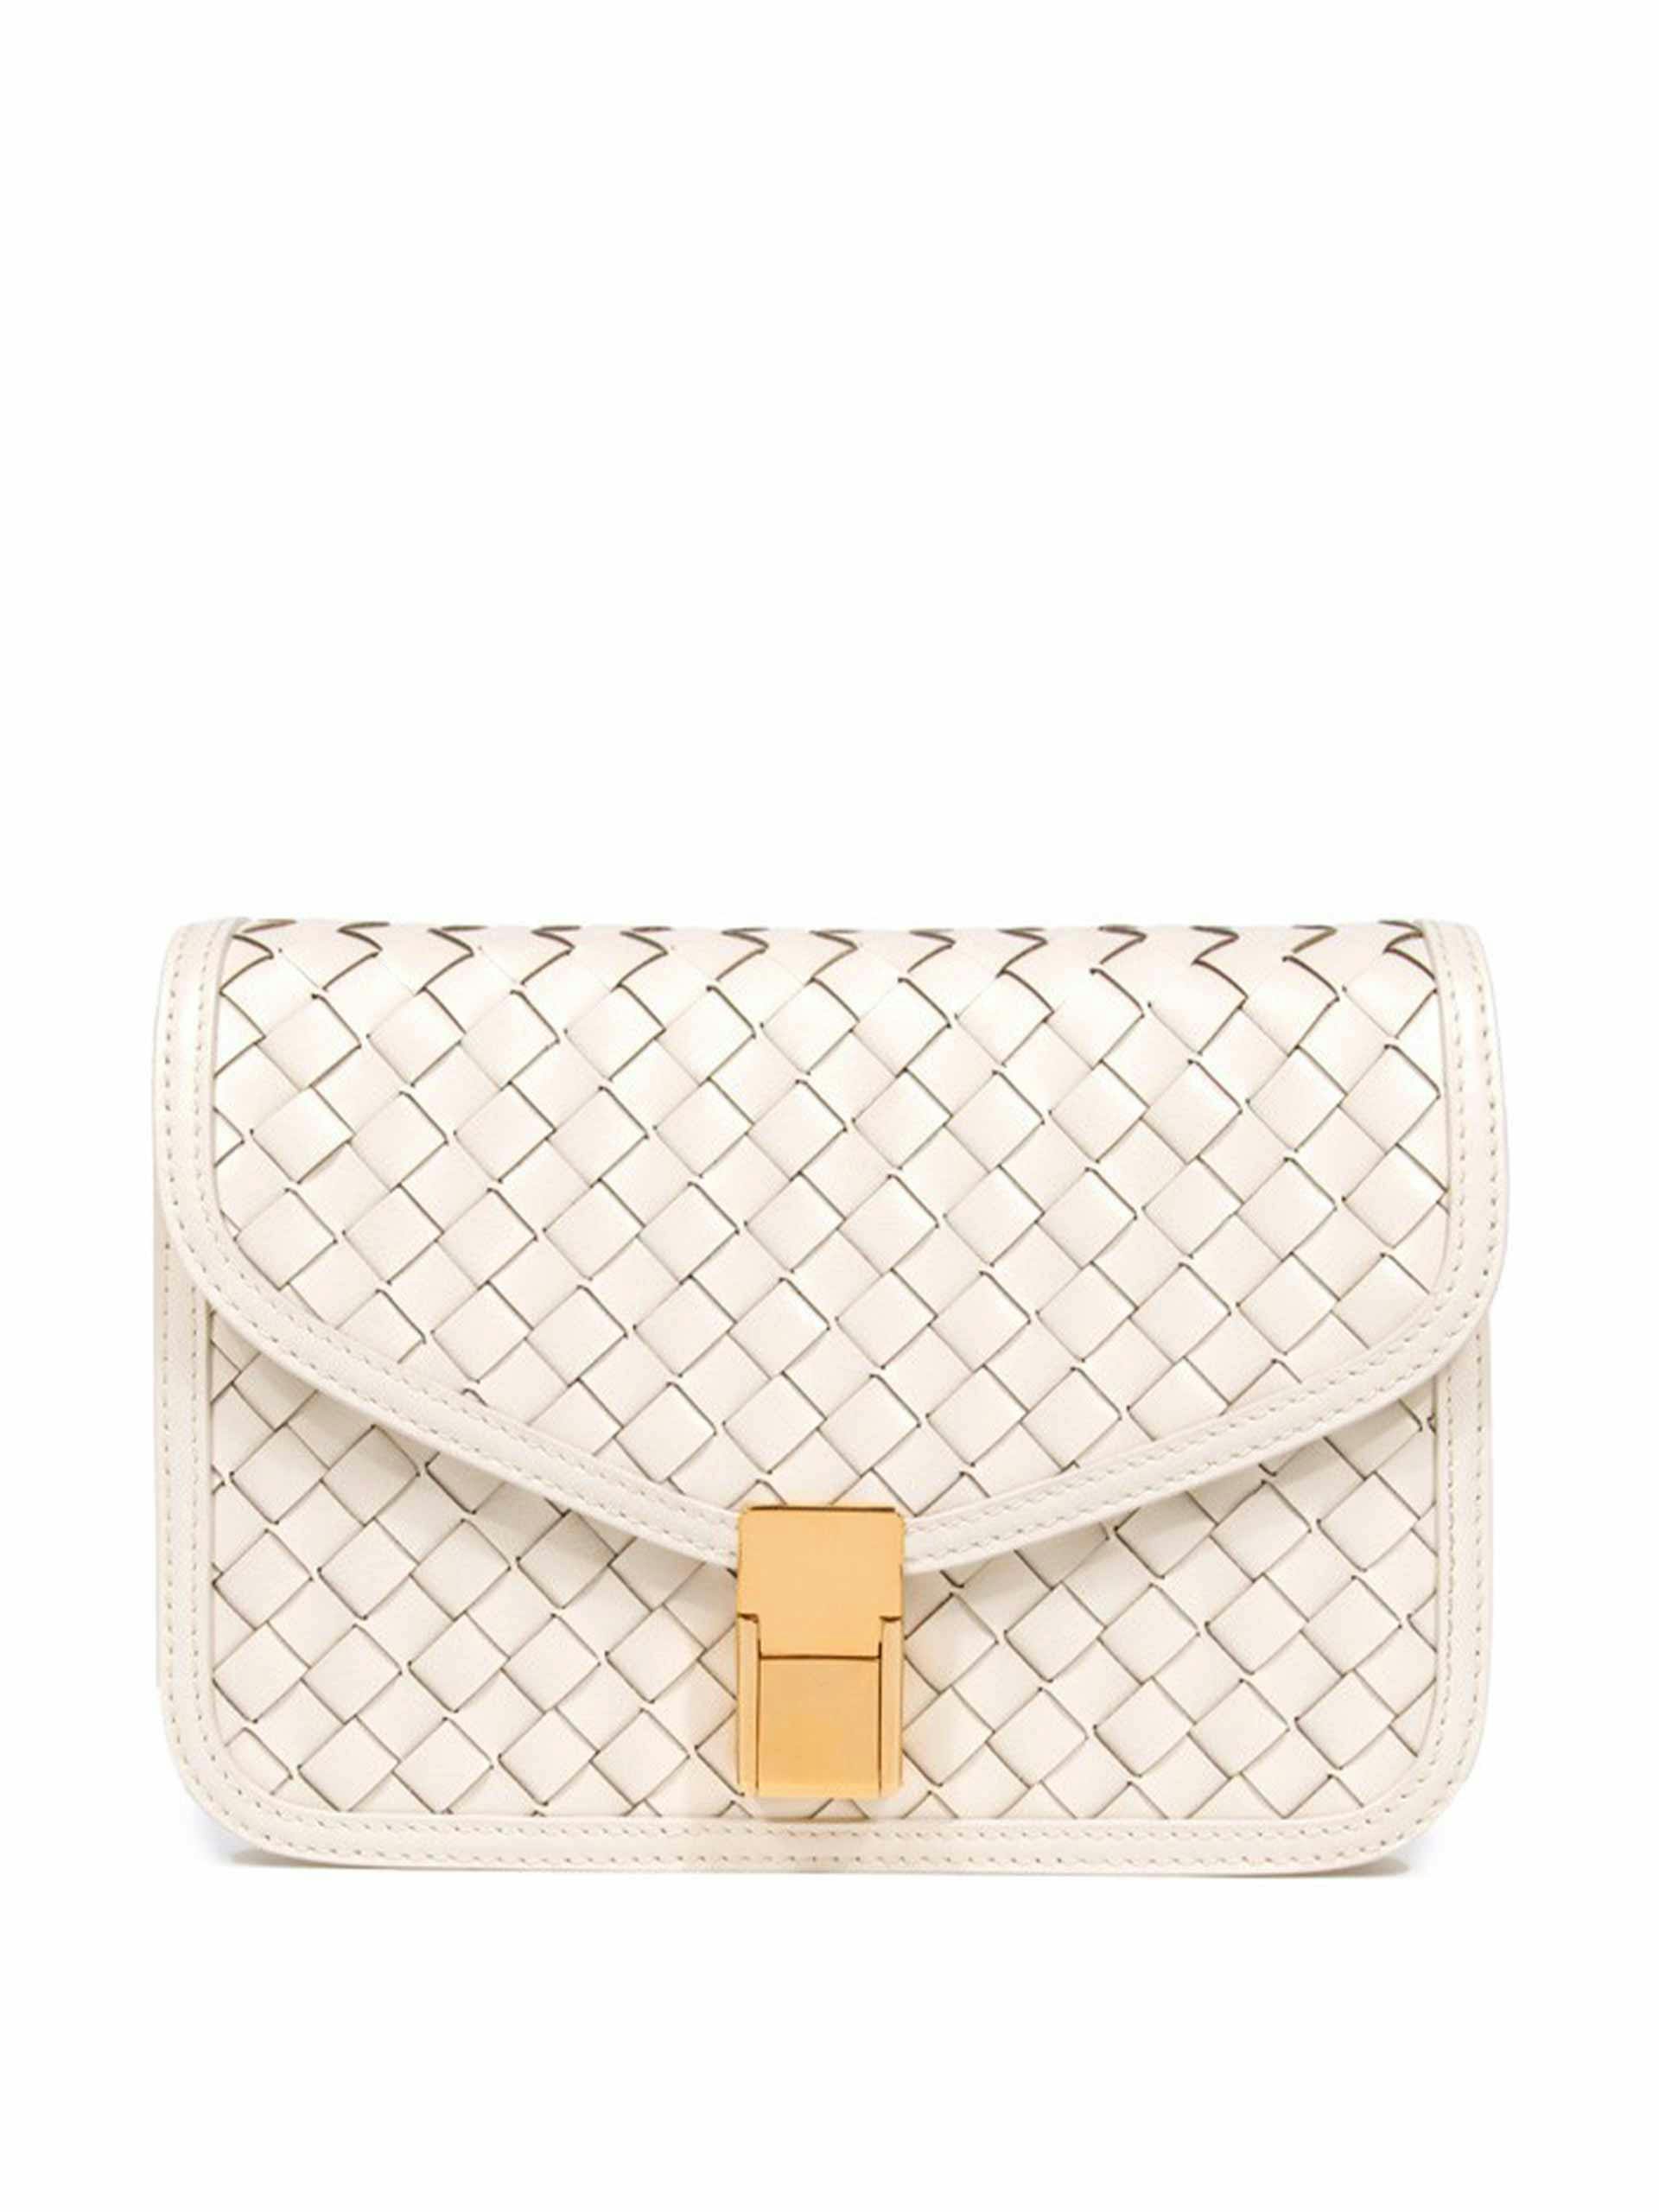 June clutch in cream woven leather